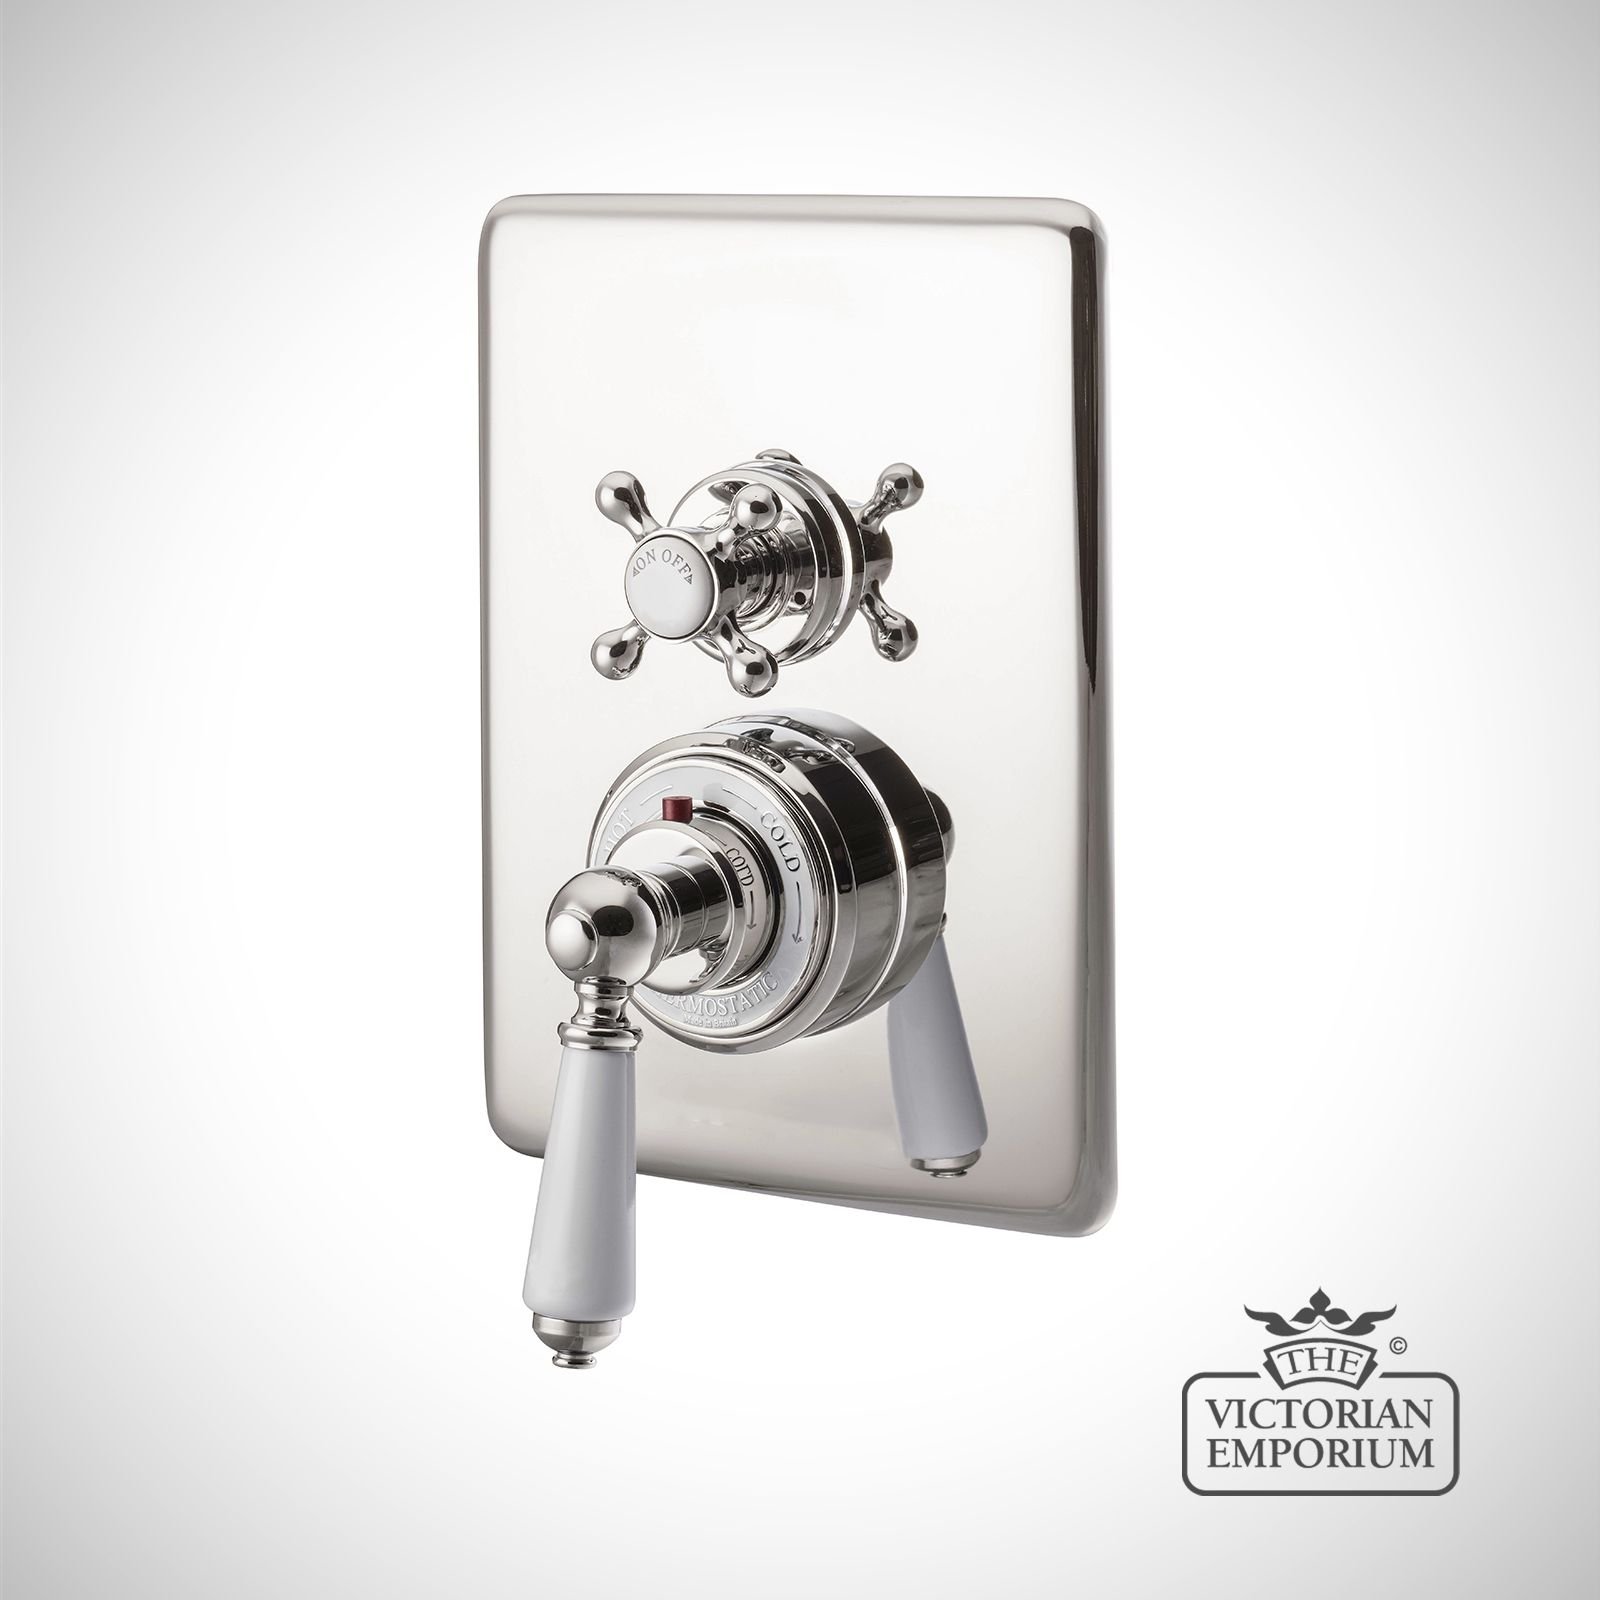 Concealed Dual Control Thermostatic Valve - 1 or 2 Outlets - in Chrome, Nickel or Copper